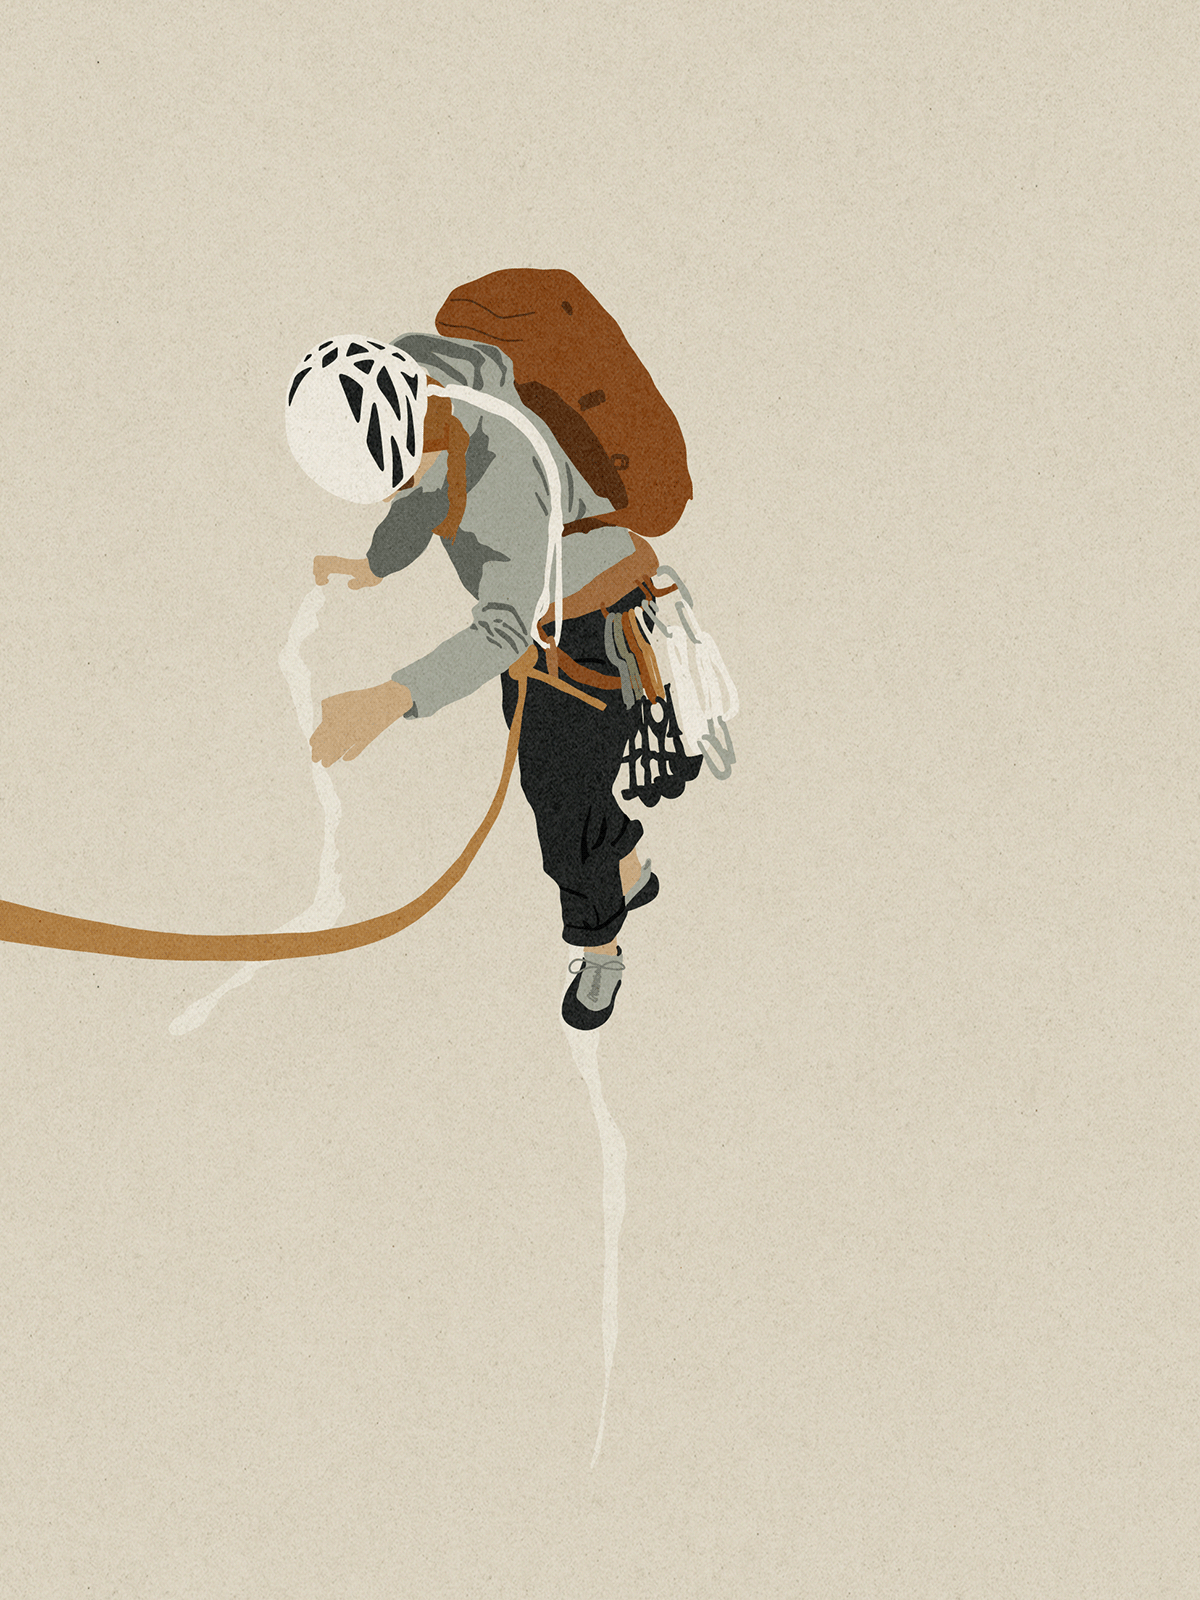 An illustration rock climbing with a minimal style and bold, earthy colors. 